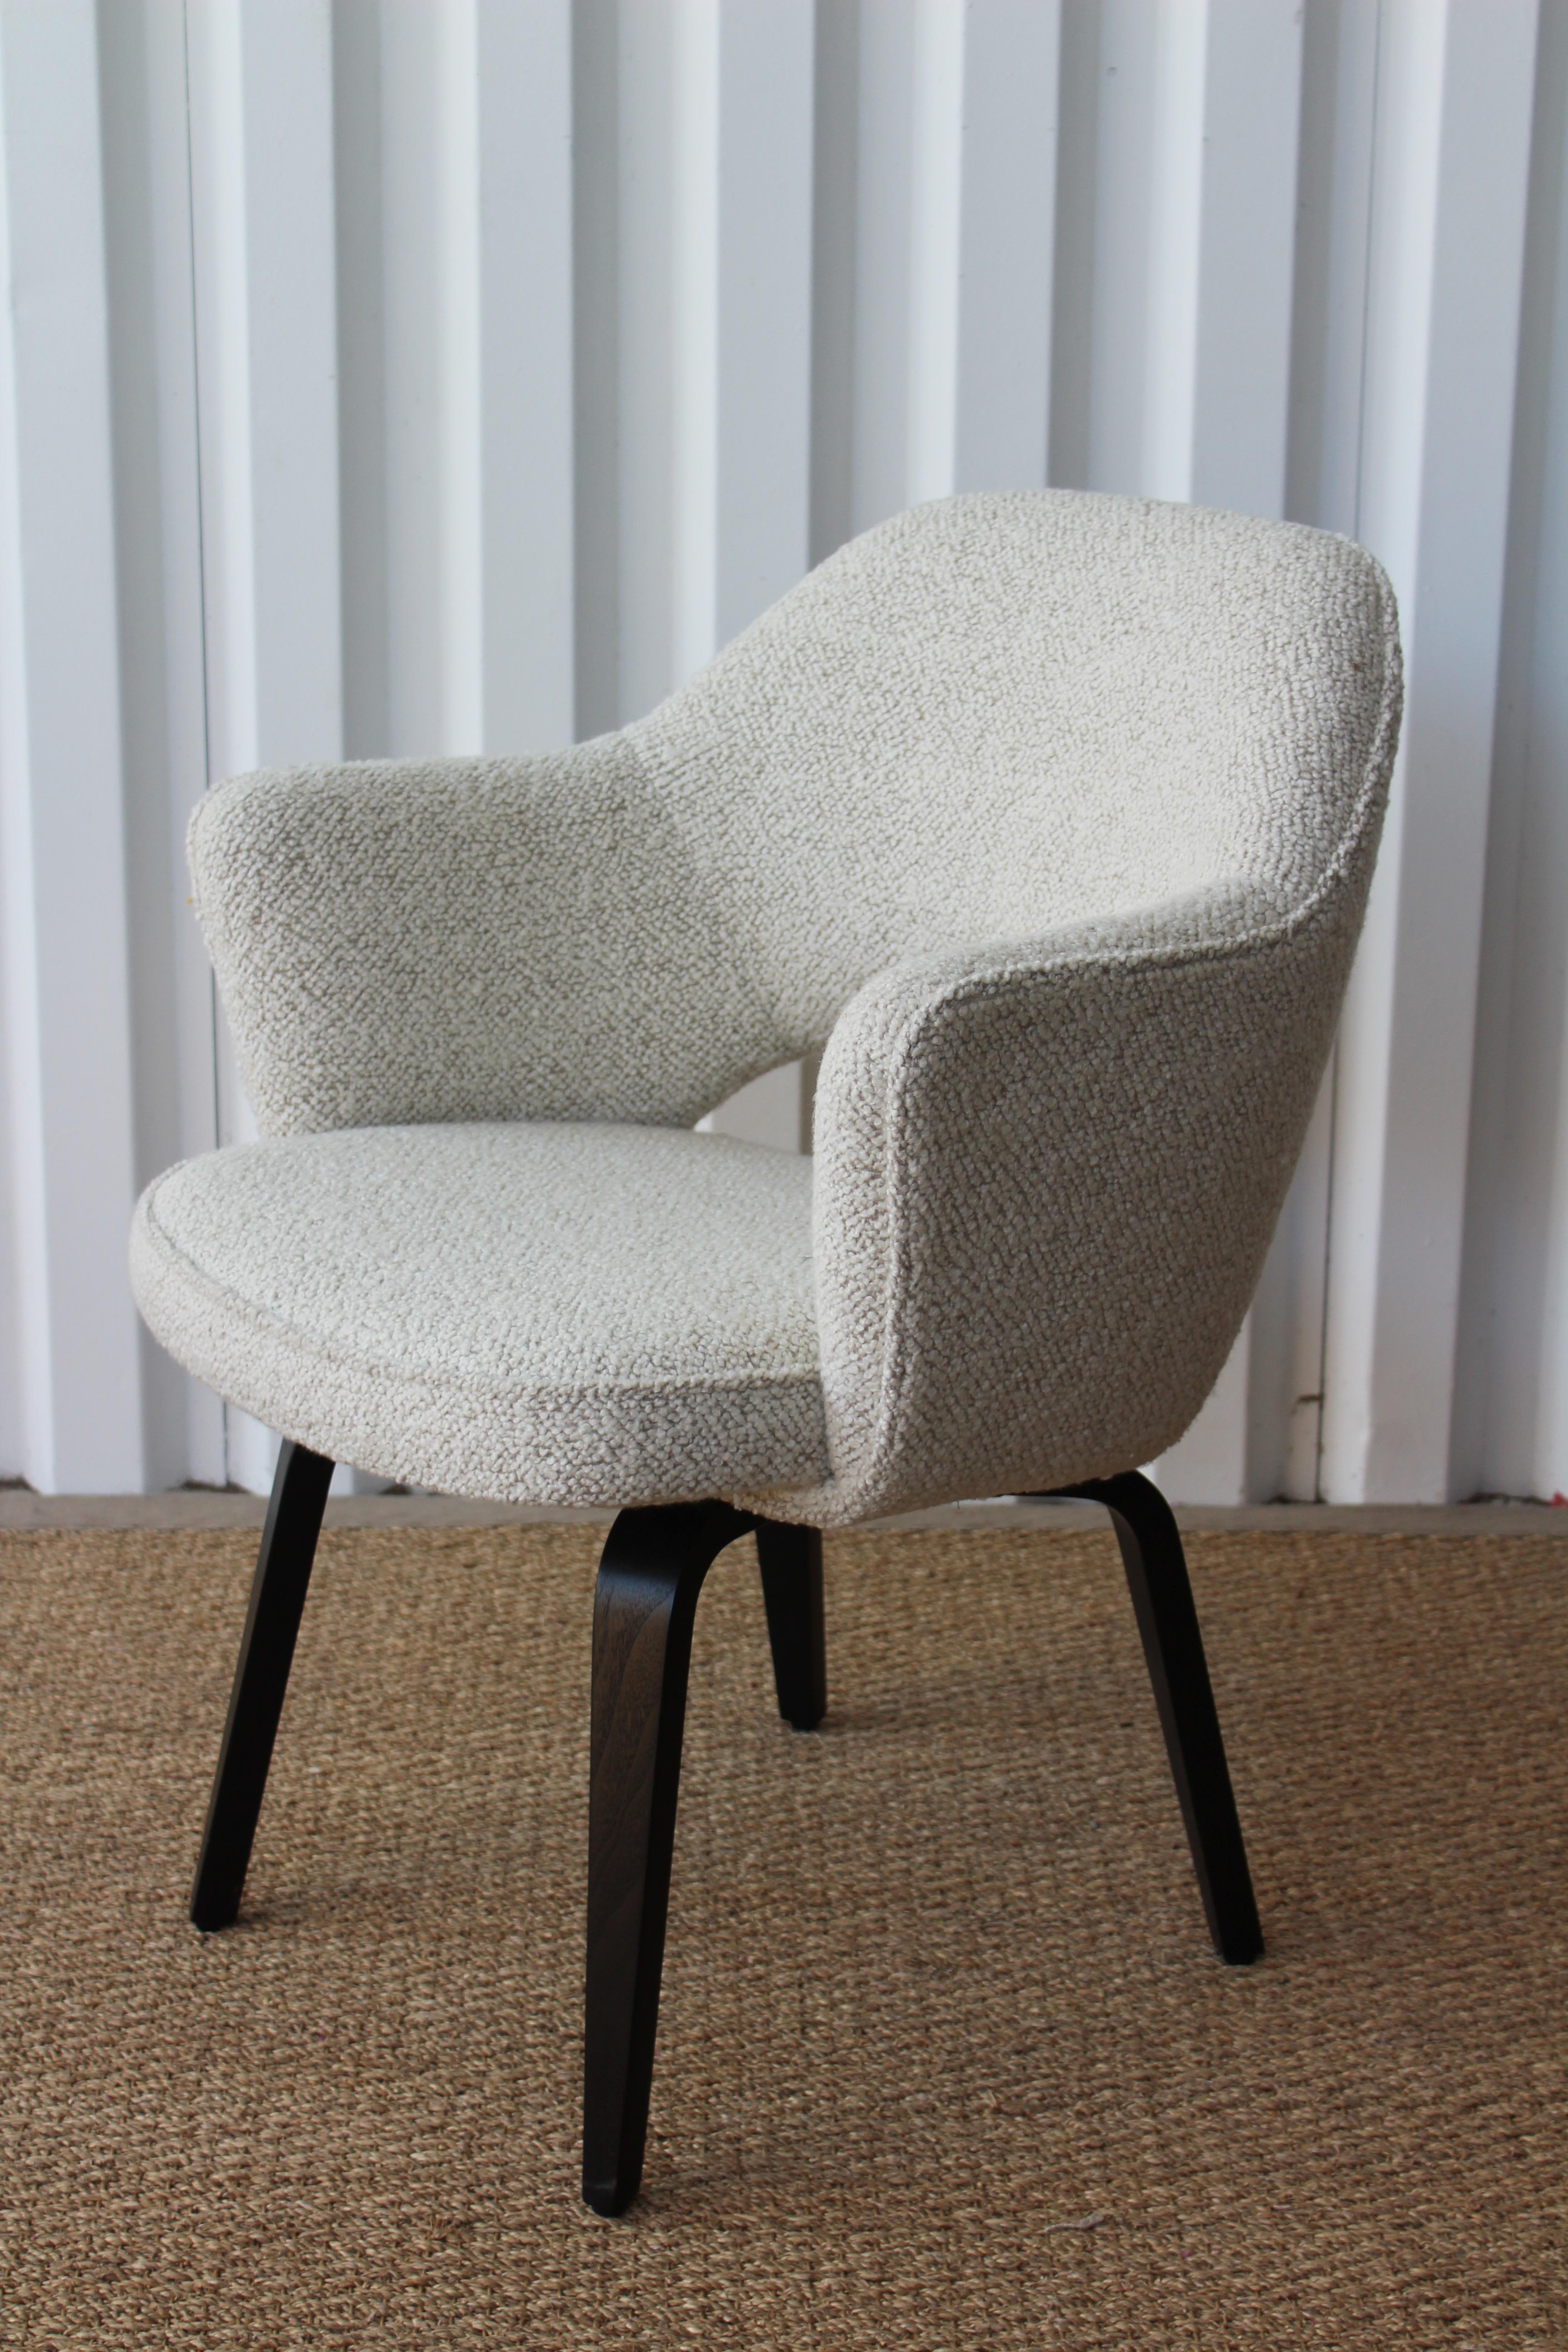 Early vintage armchair designed by Eero Saarinen for Knoll, 1950s. This chair has been completely restored and reupholstered in a soft Italian wool bouclé. The bent walnut legs have been refinished in a satin black finish.